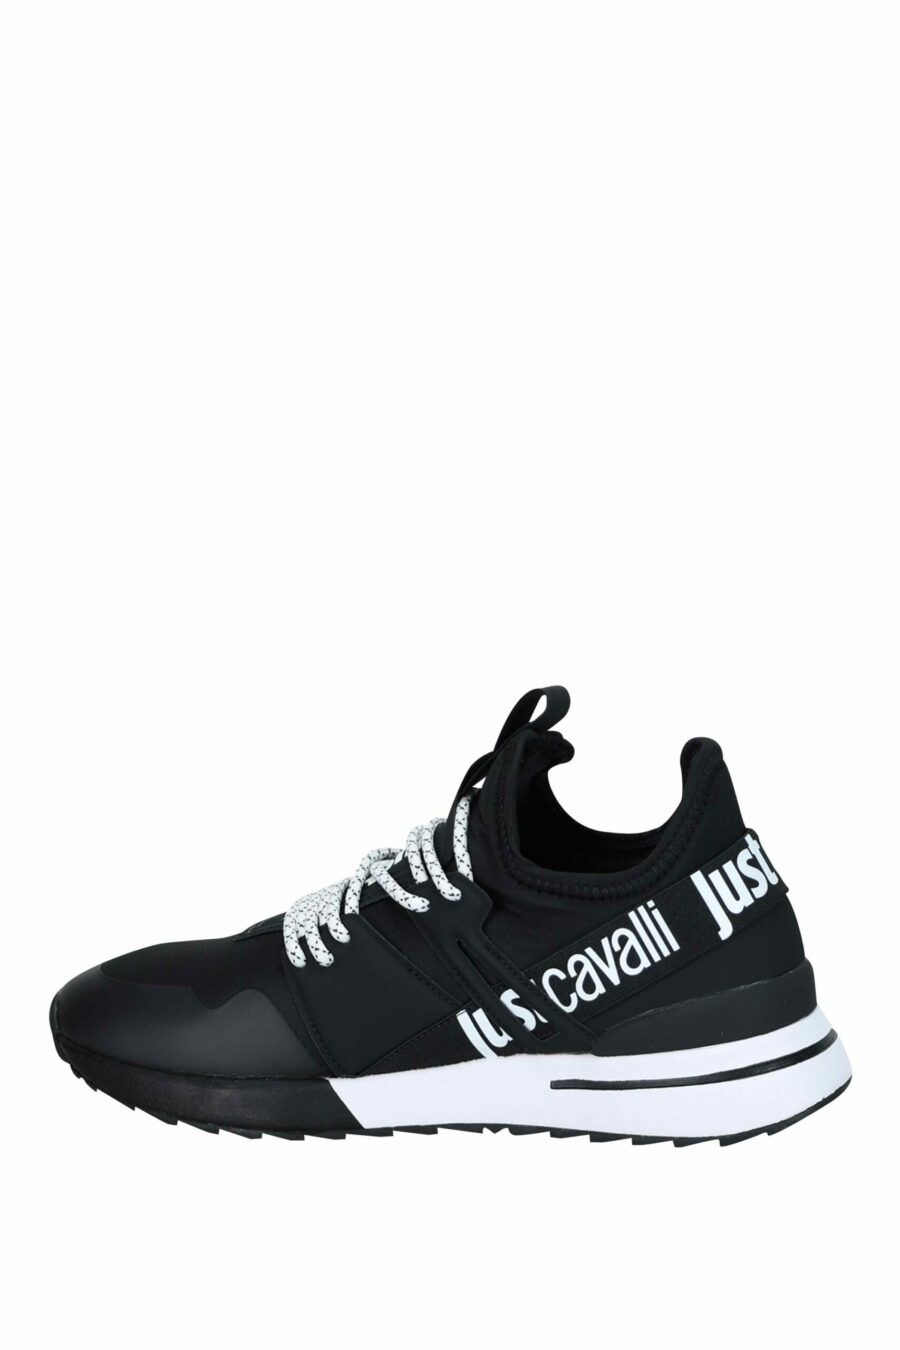 Black trainers with ribbon logo - 8052672738264 2 scaled